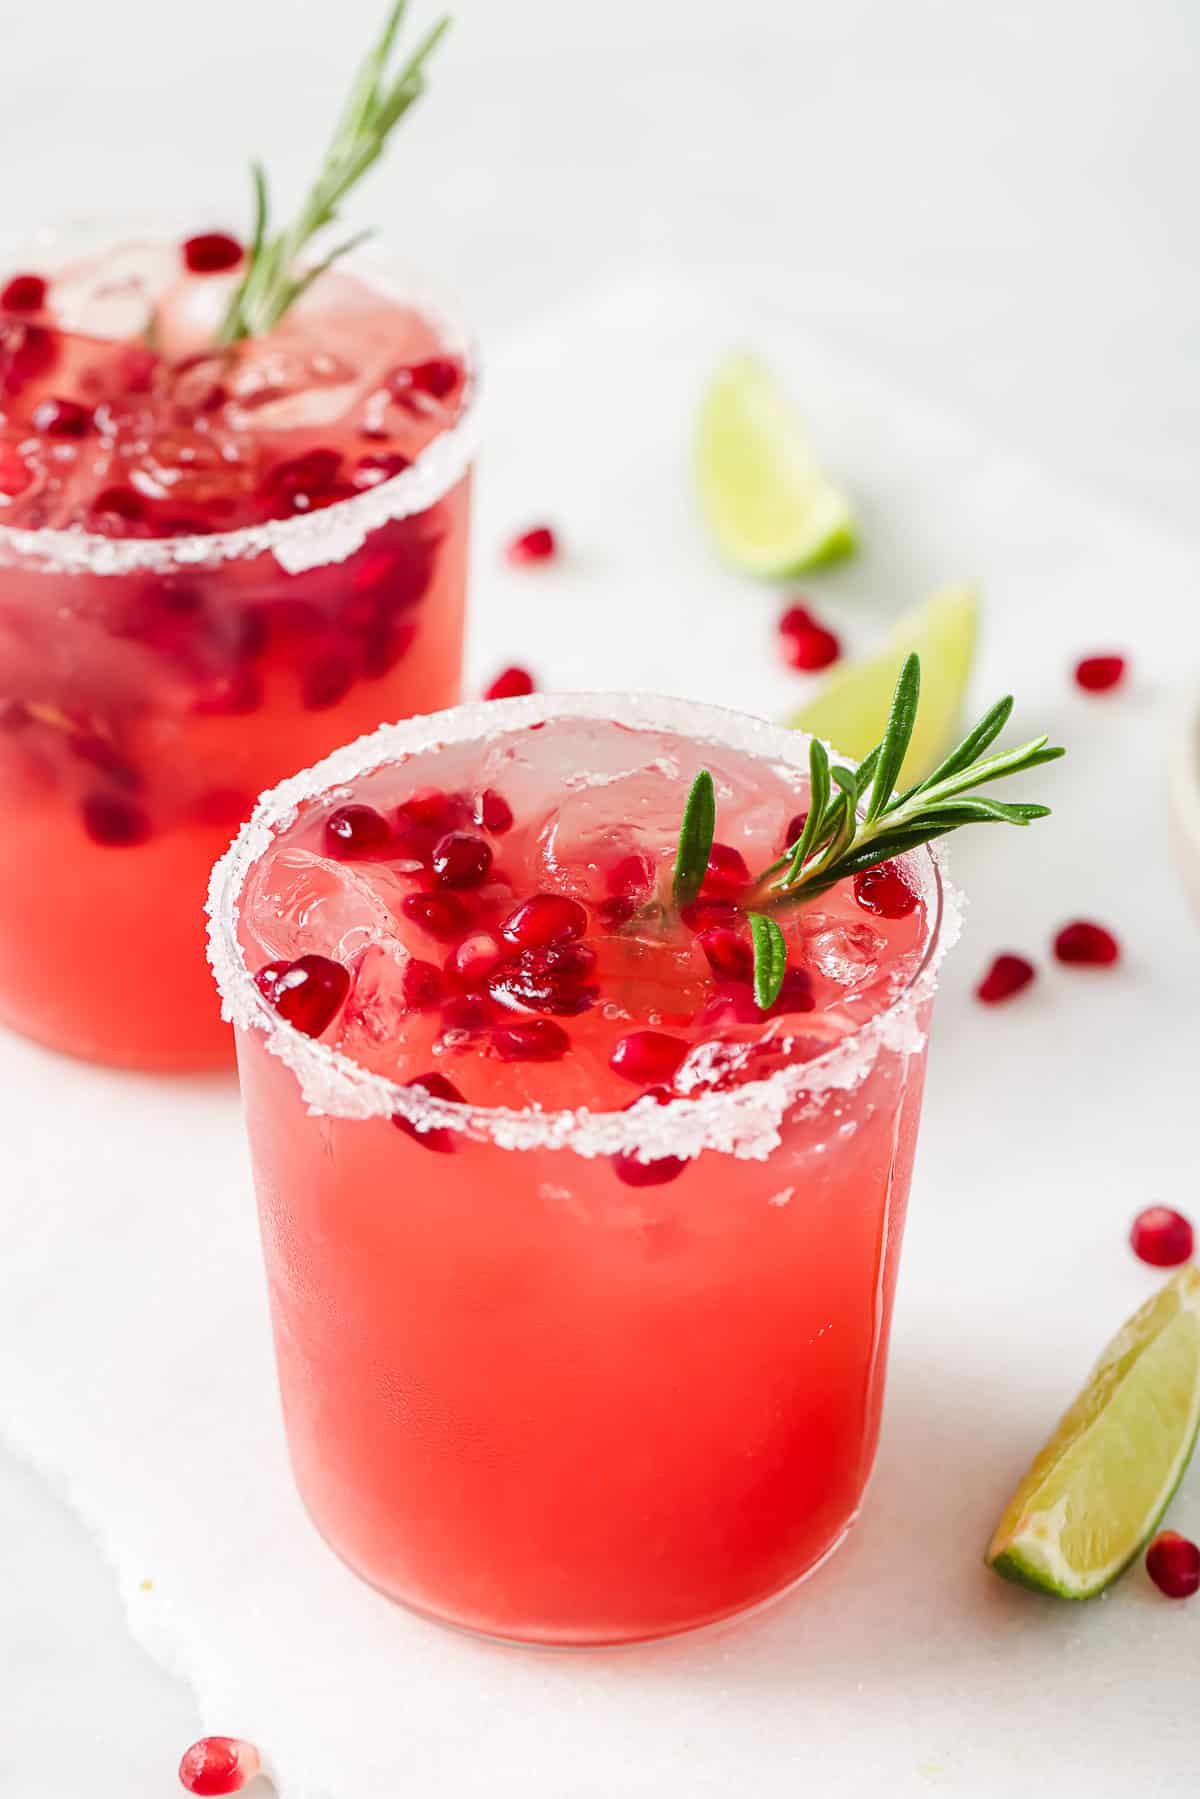 Two pomegranate cocktails with rosemary.